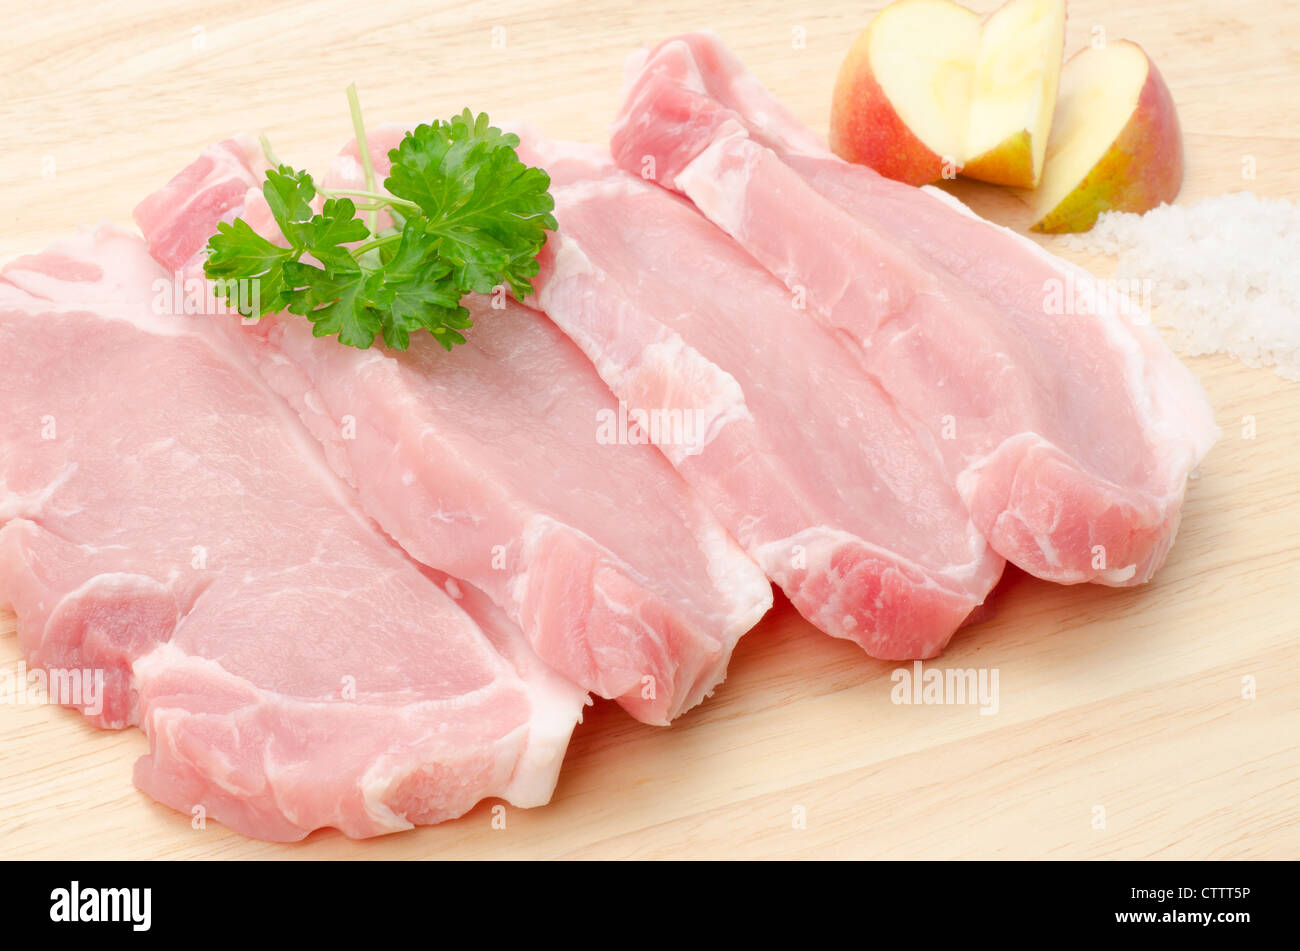 Uncooked pork loin on a wooden cutting board - studio shot Stock Photo